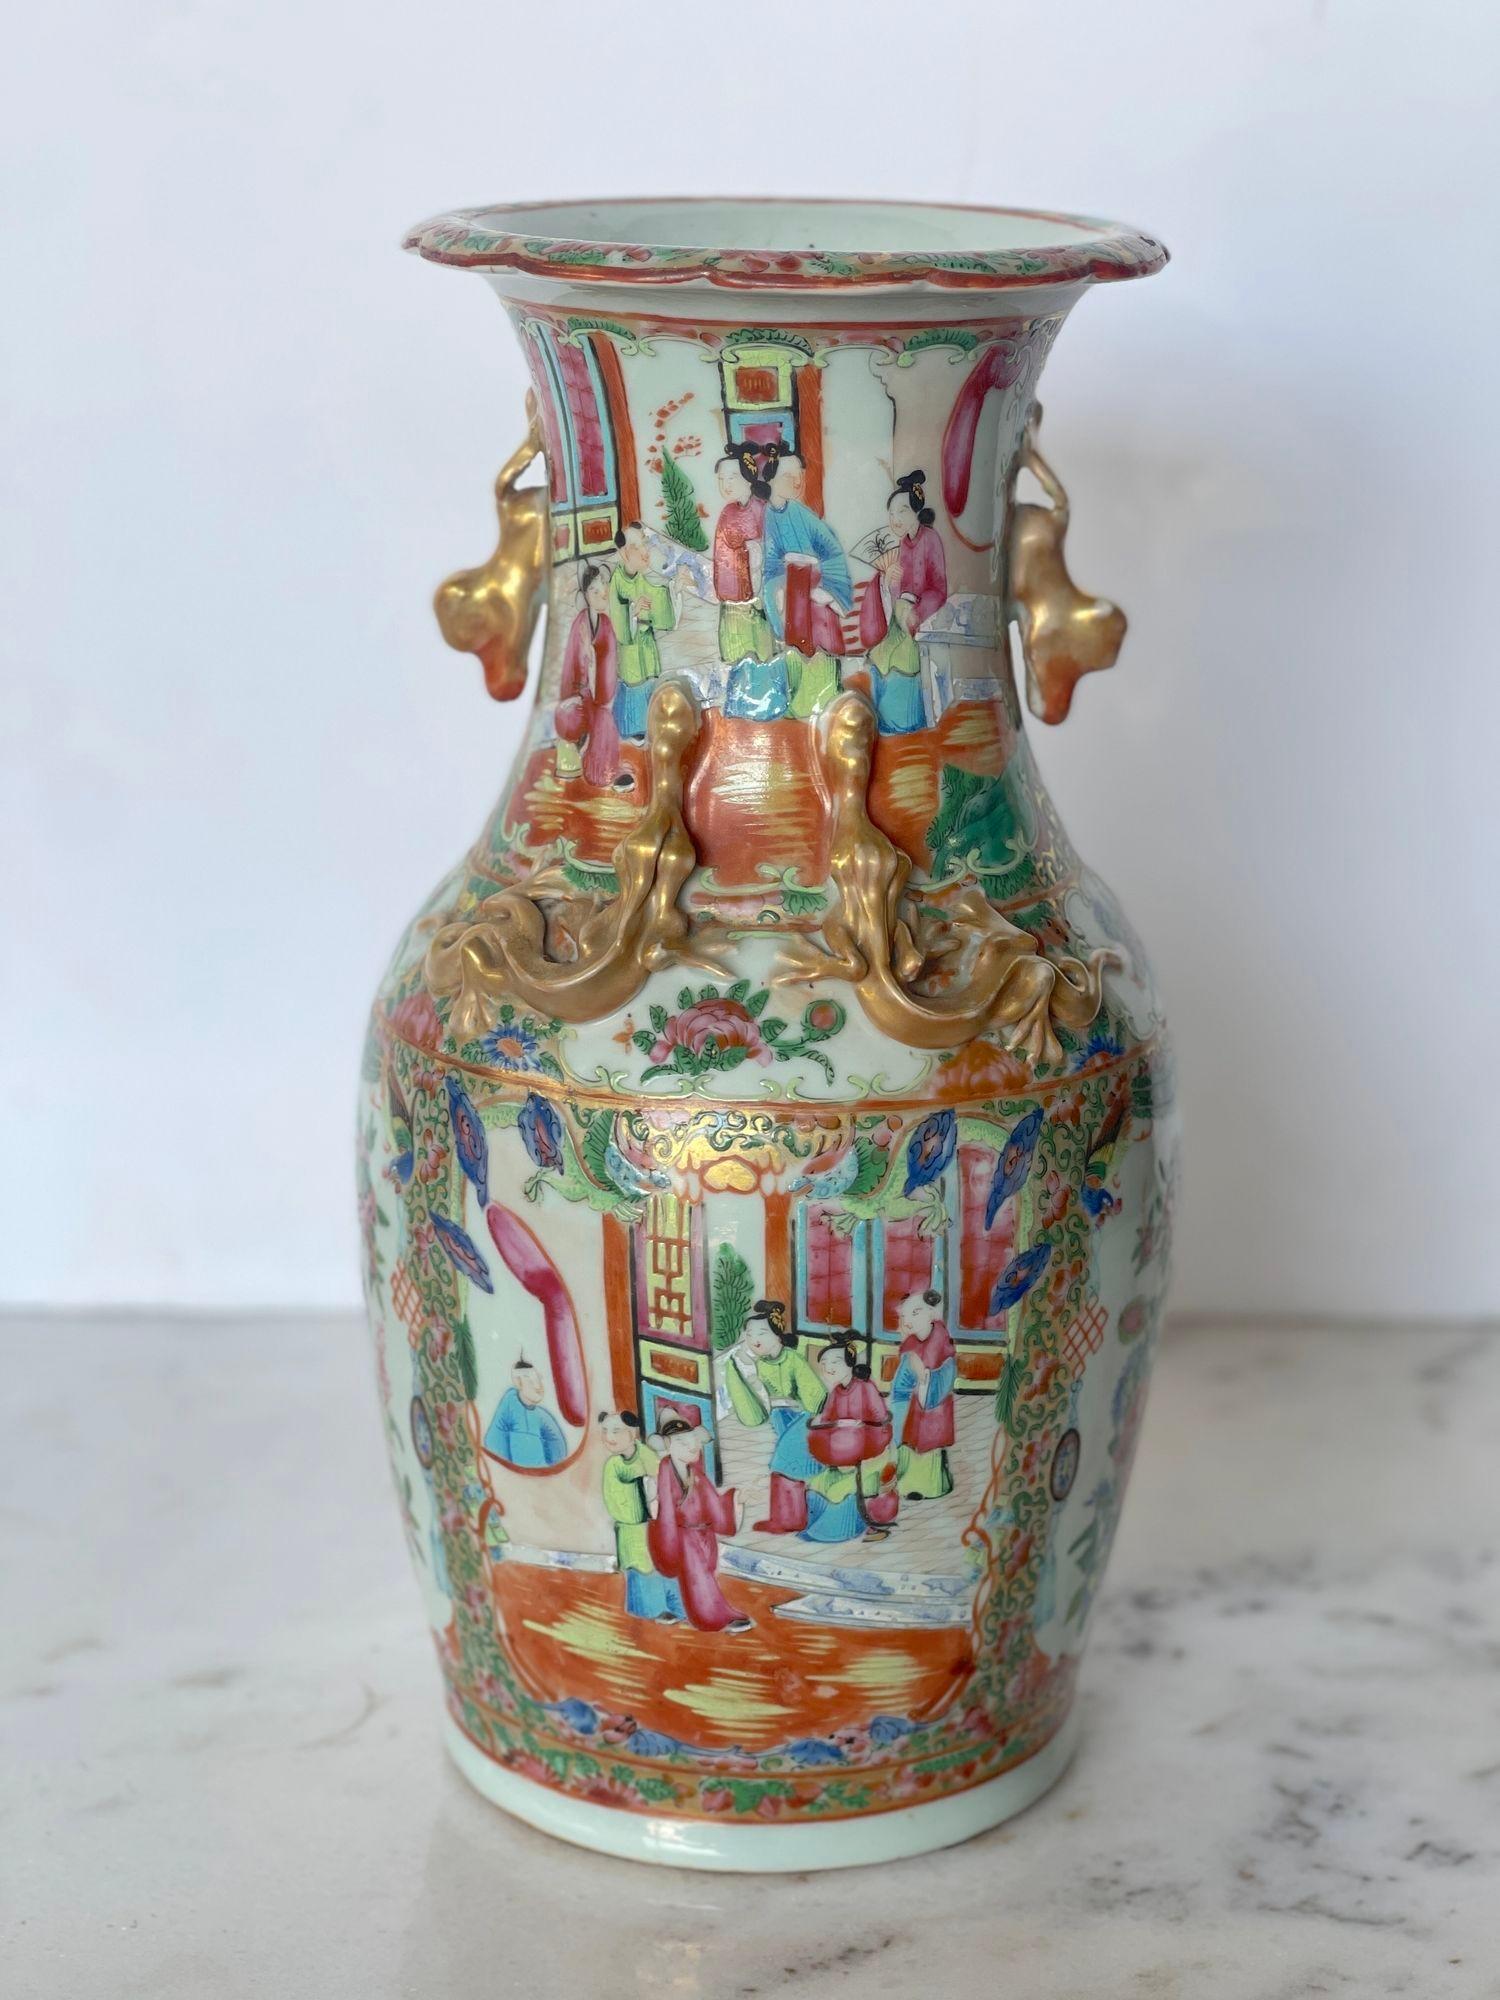 Traditional Chinese Rose Canton porcelain vase. Made in the 19th century.
Dimensions:
14